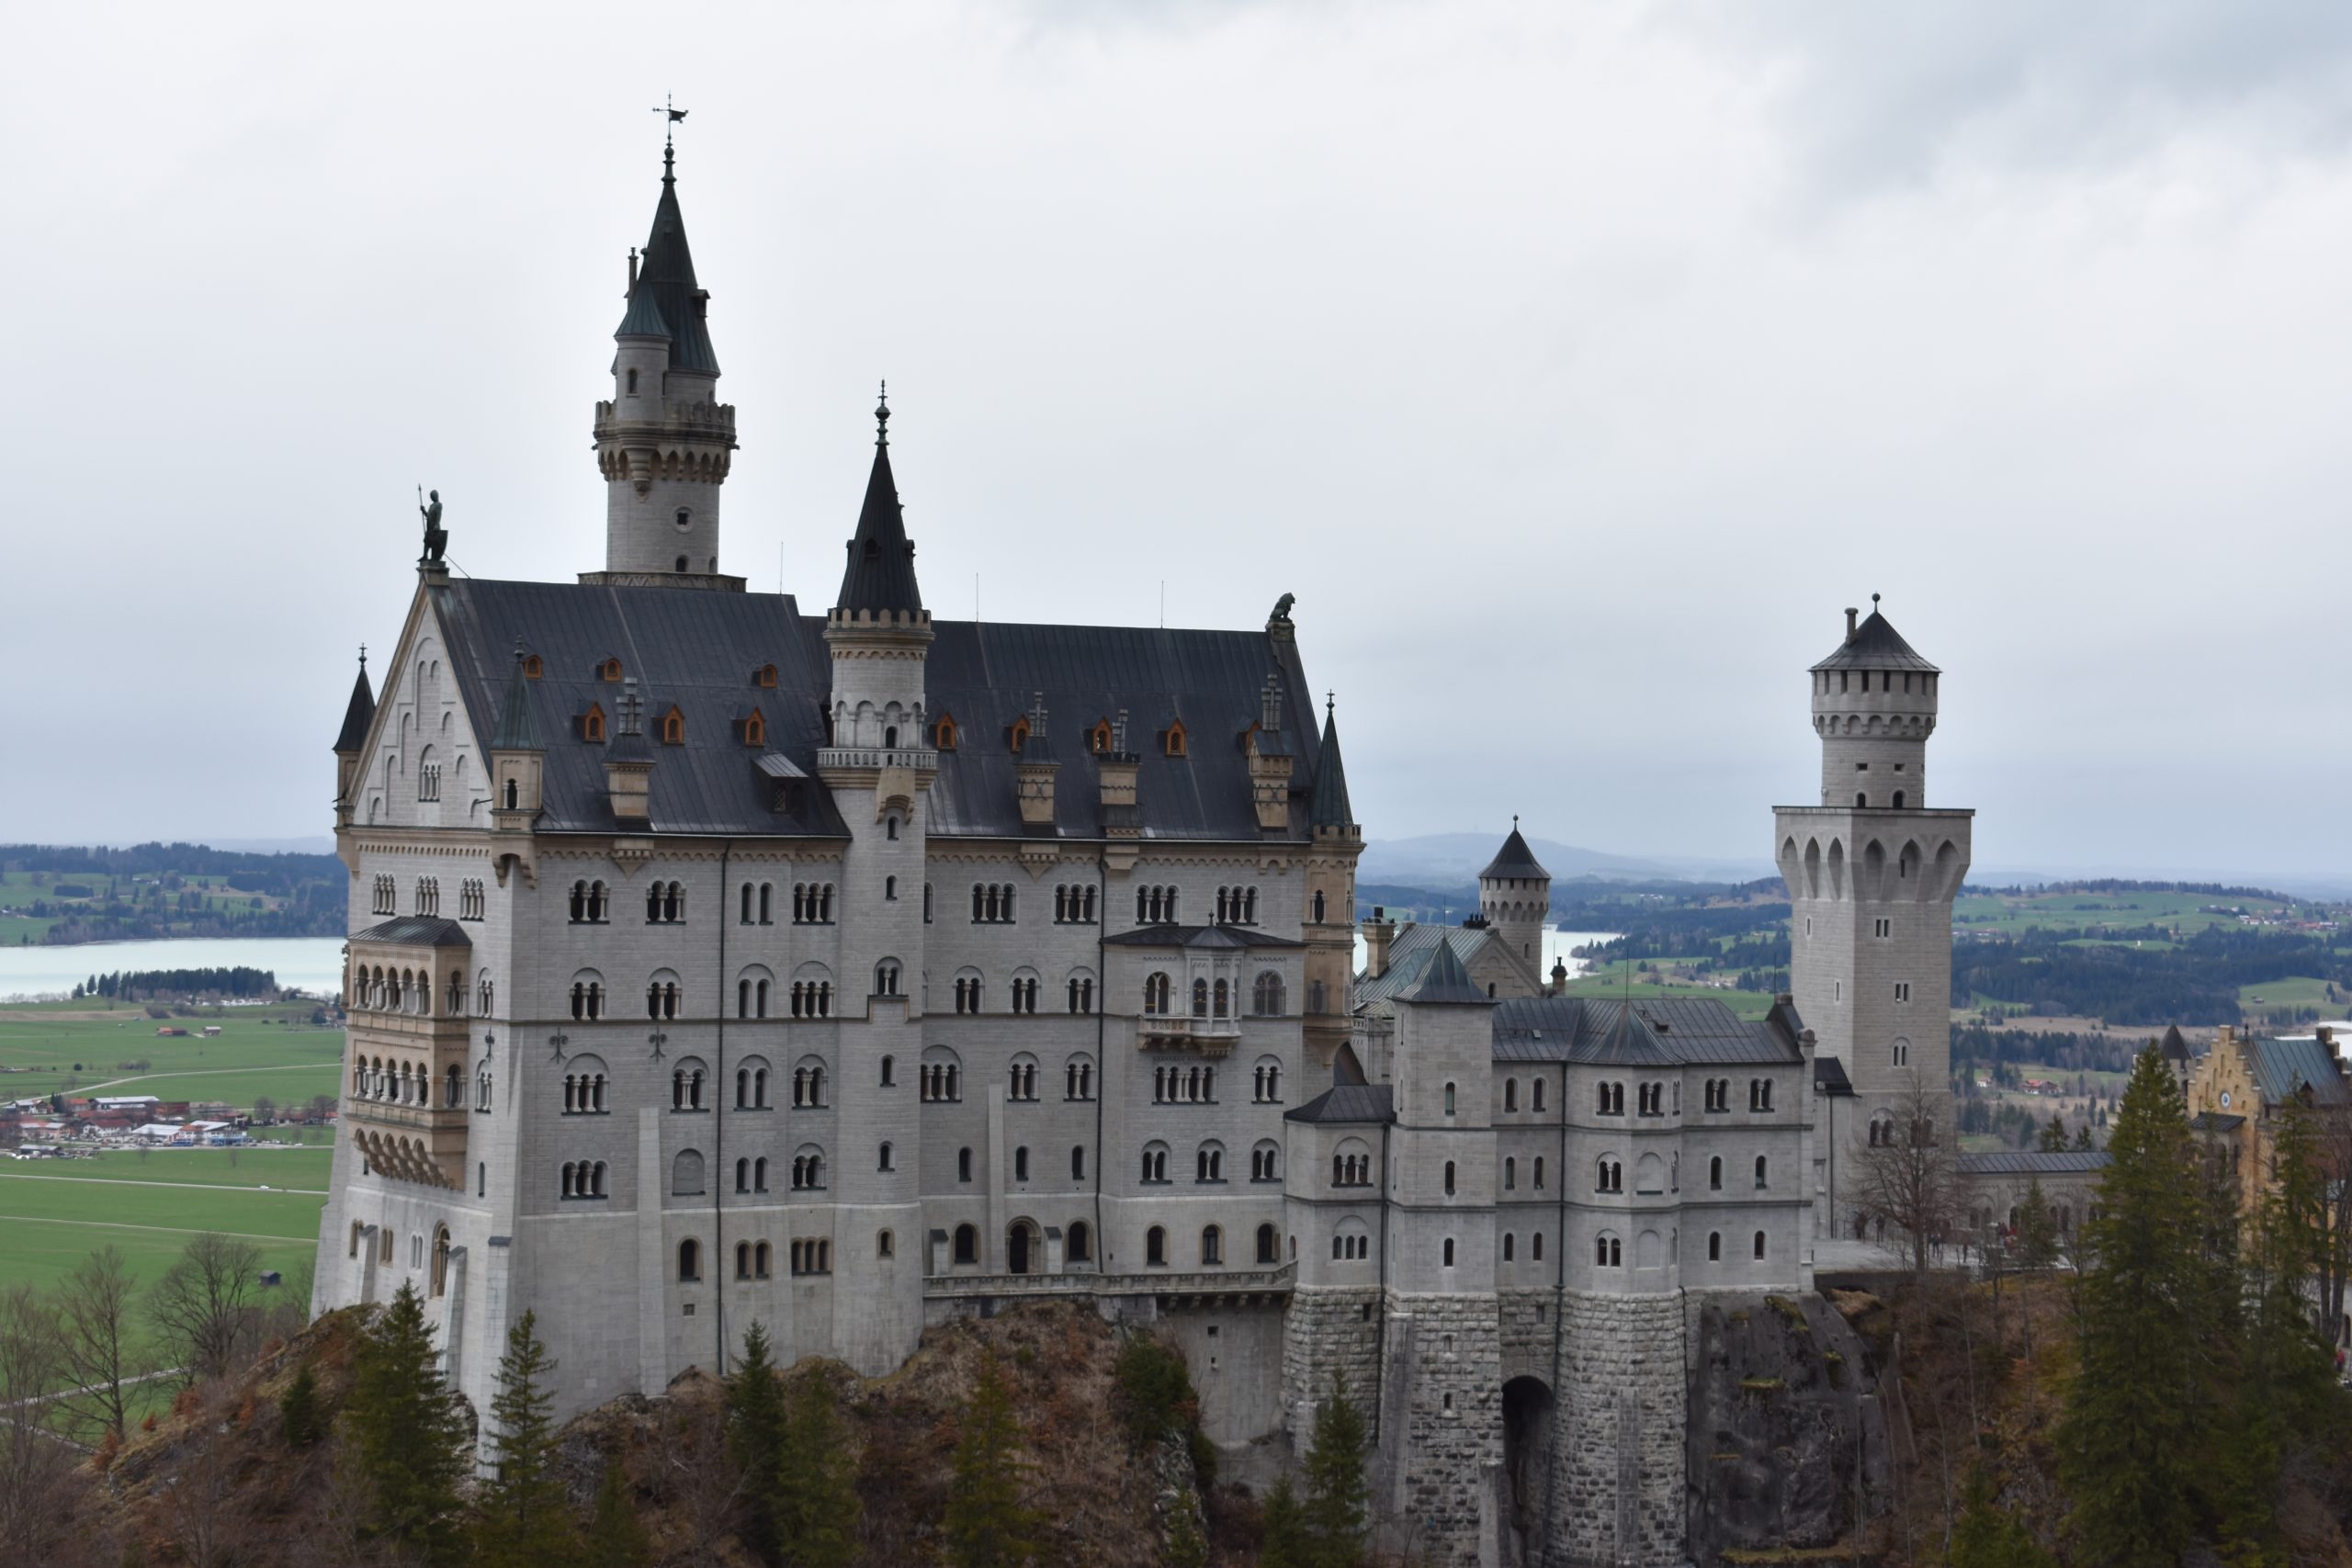 A view of Neuschwanstein castle from afar. It's a white, German-style castle that's approximately 7 stories high, with grey roof tiles and tall, thin spires. The castle is perched upon a hill.